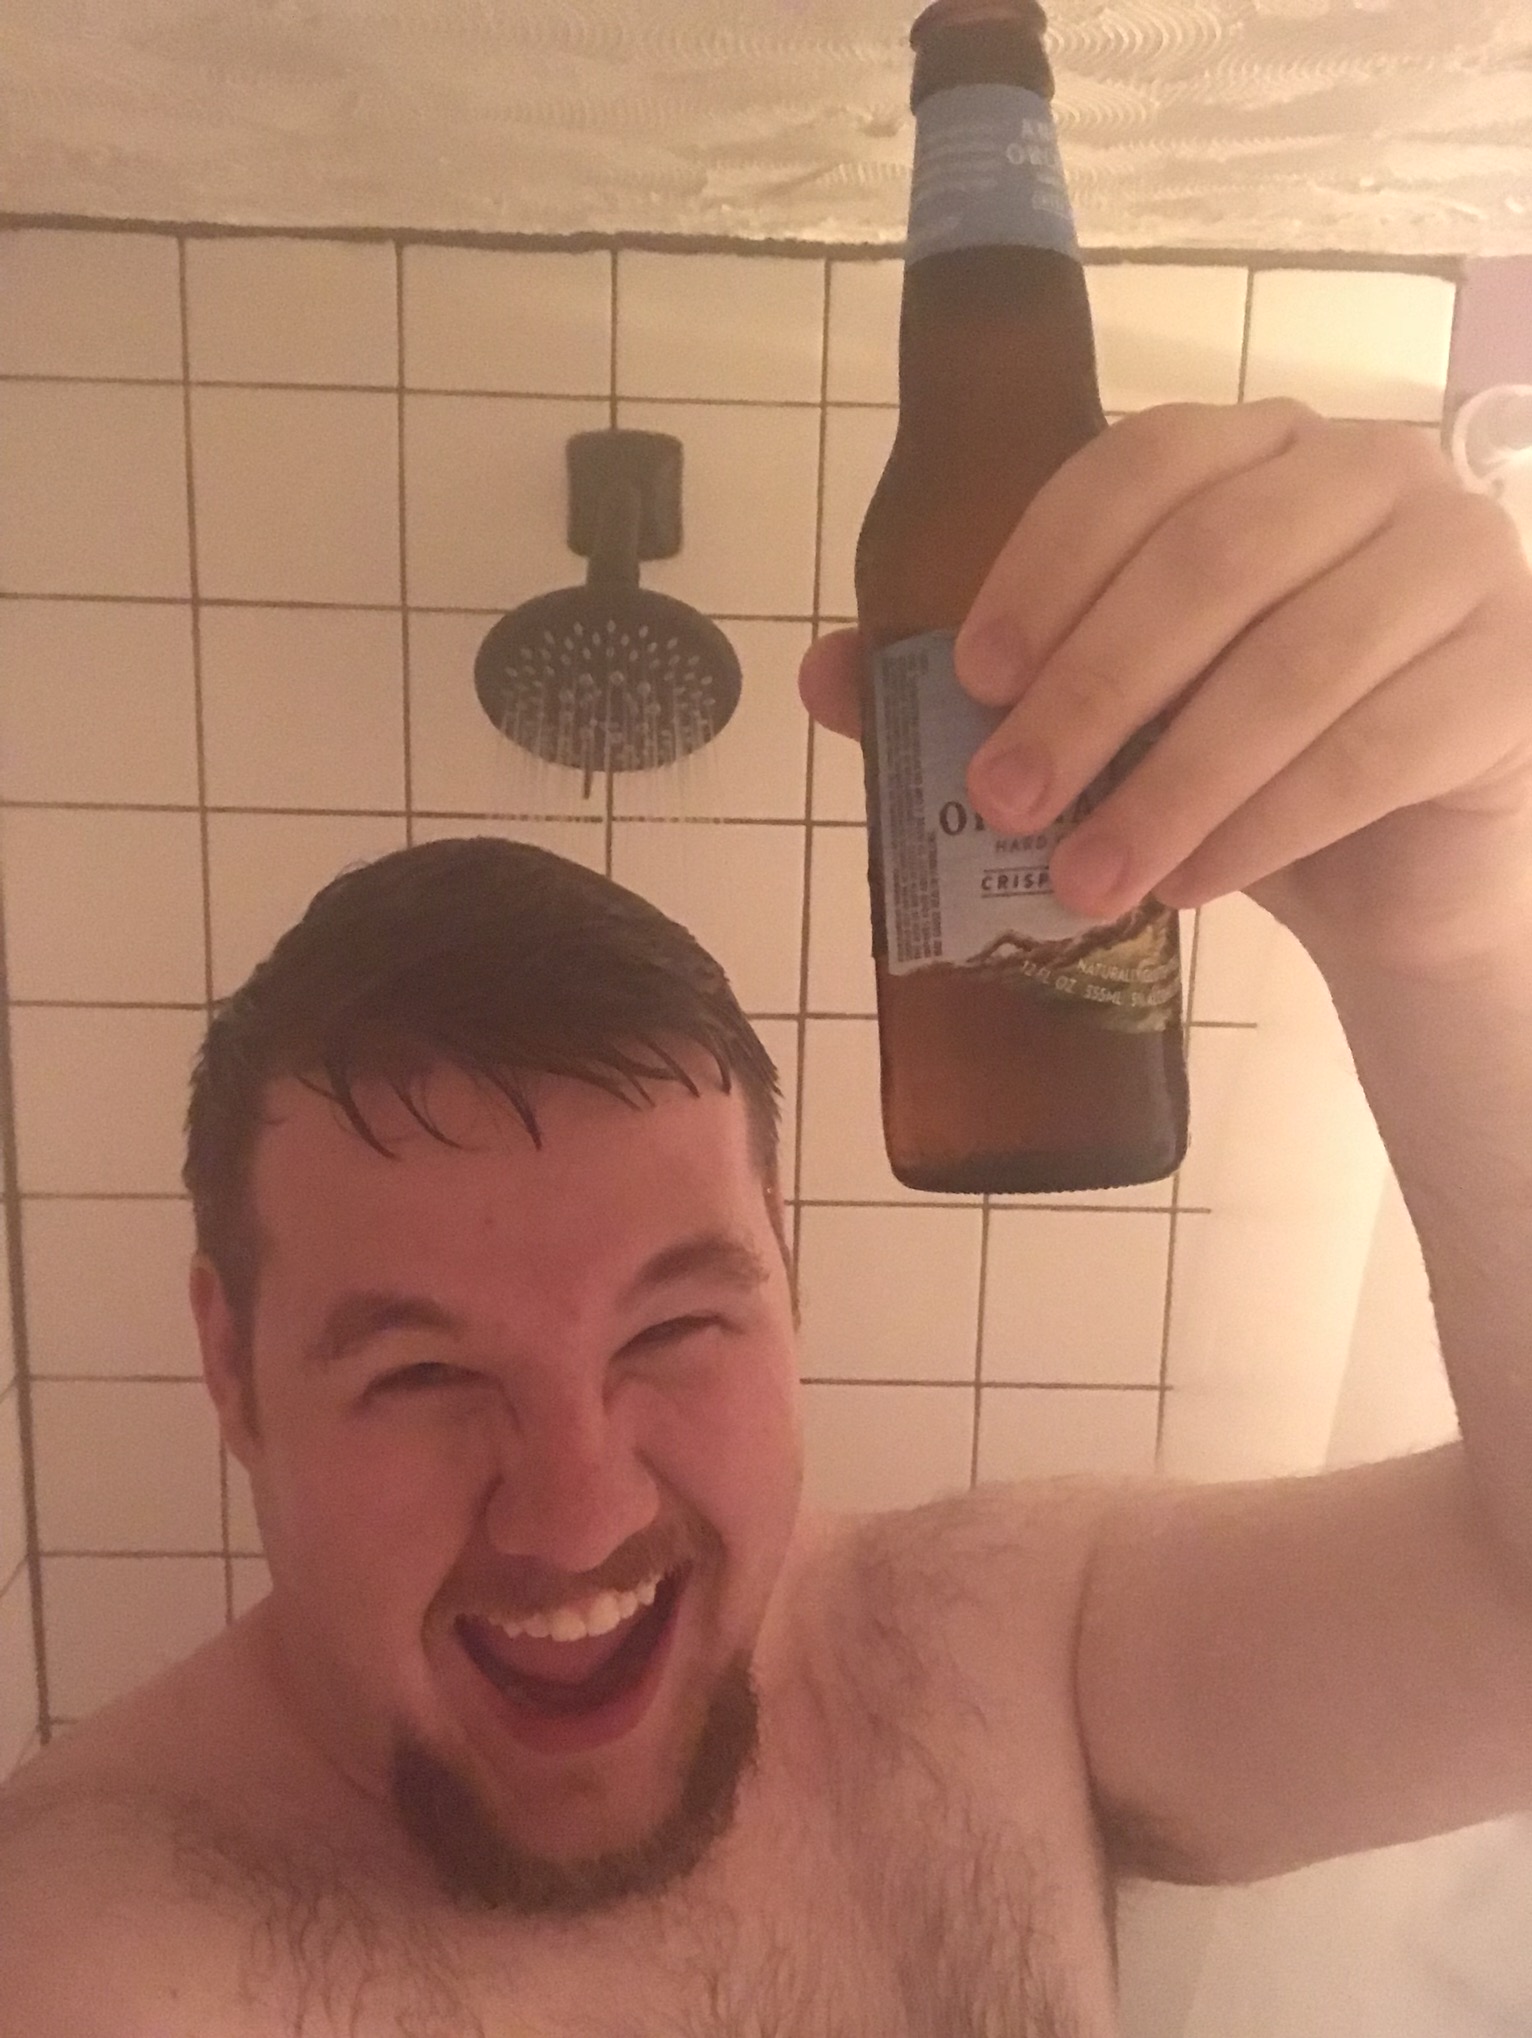 Enjoying a beverage in the shower